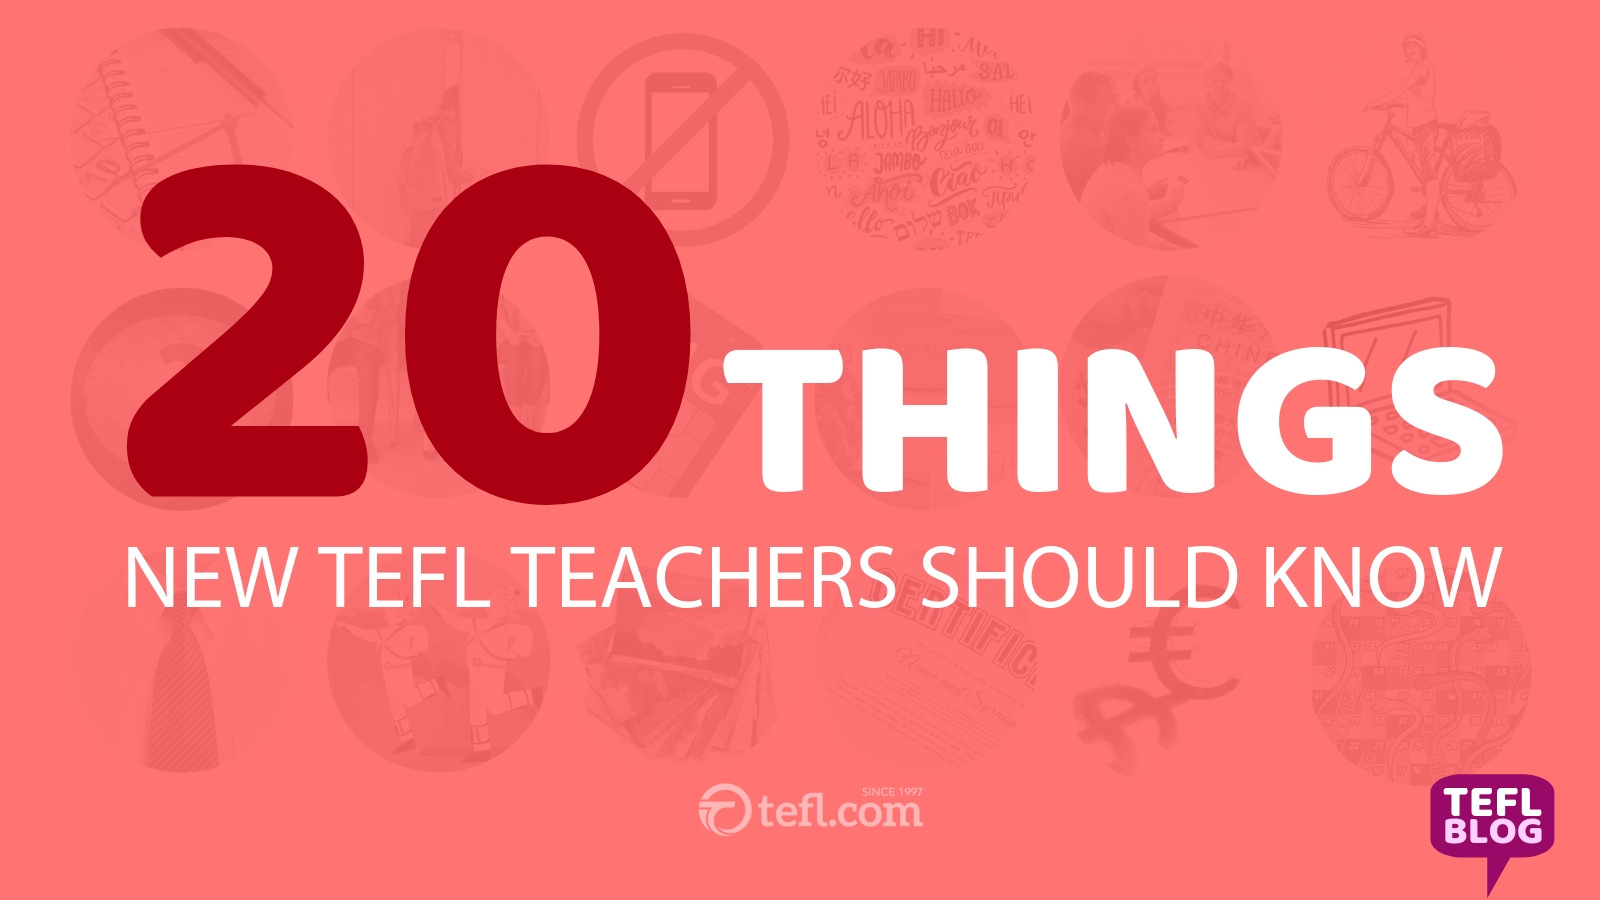 20 Things New TEFL Teachers Should Know